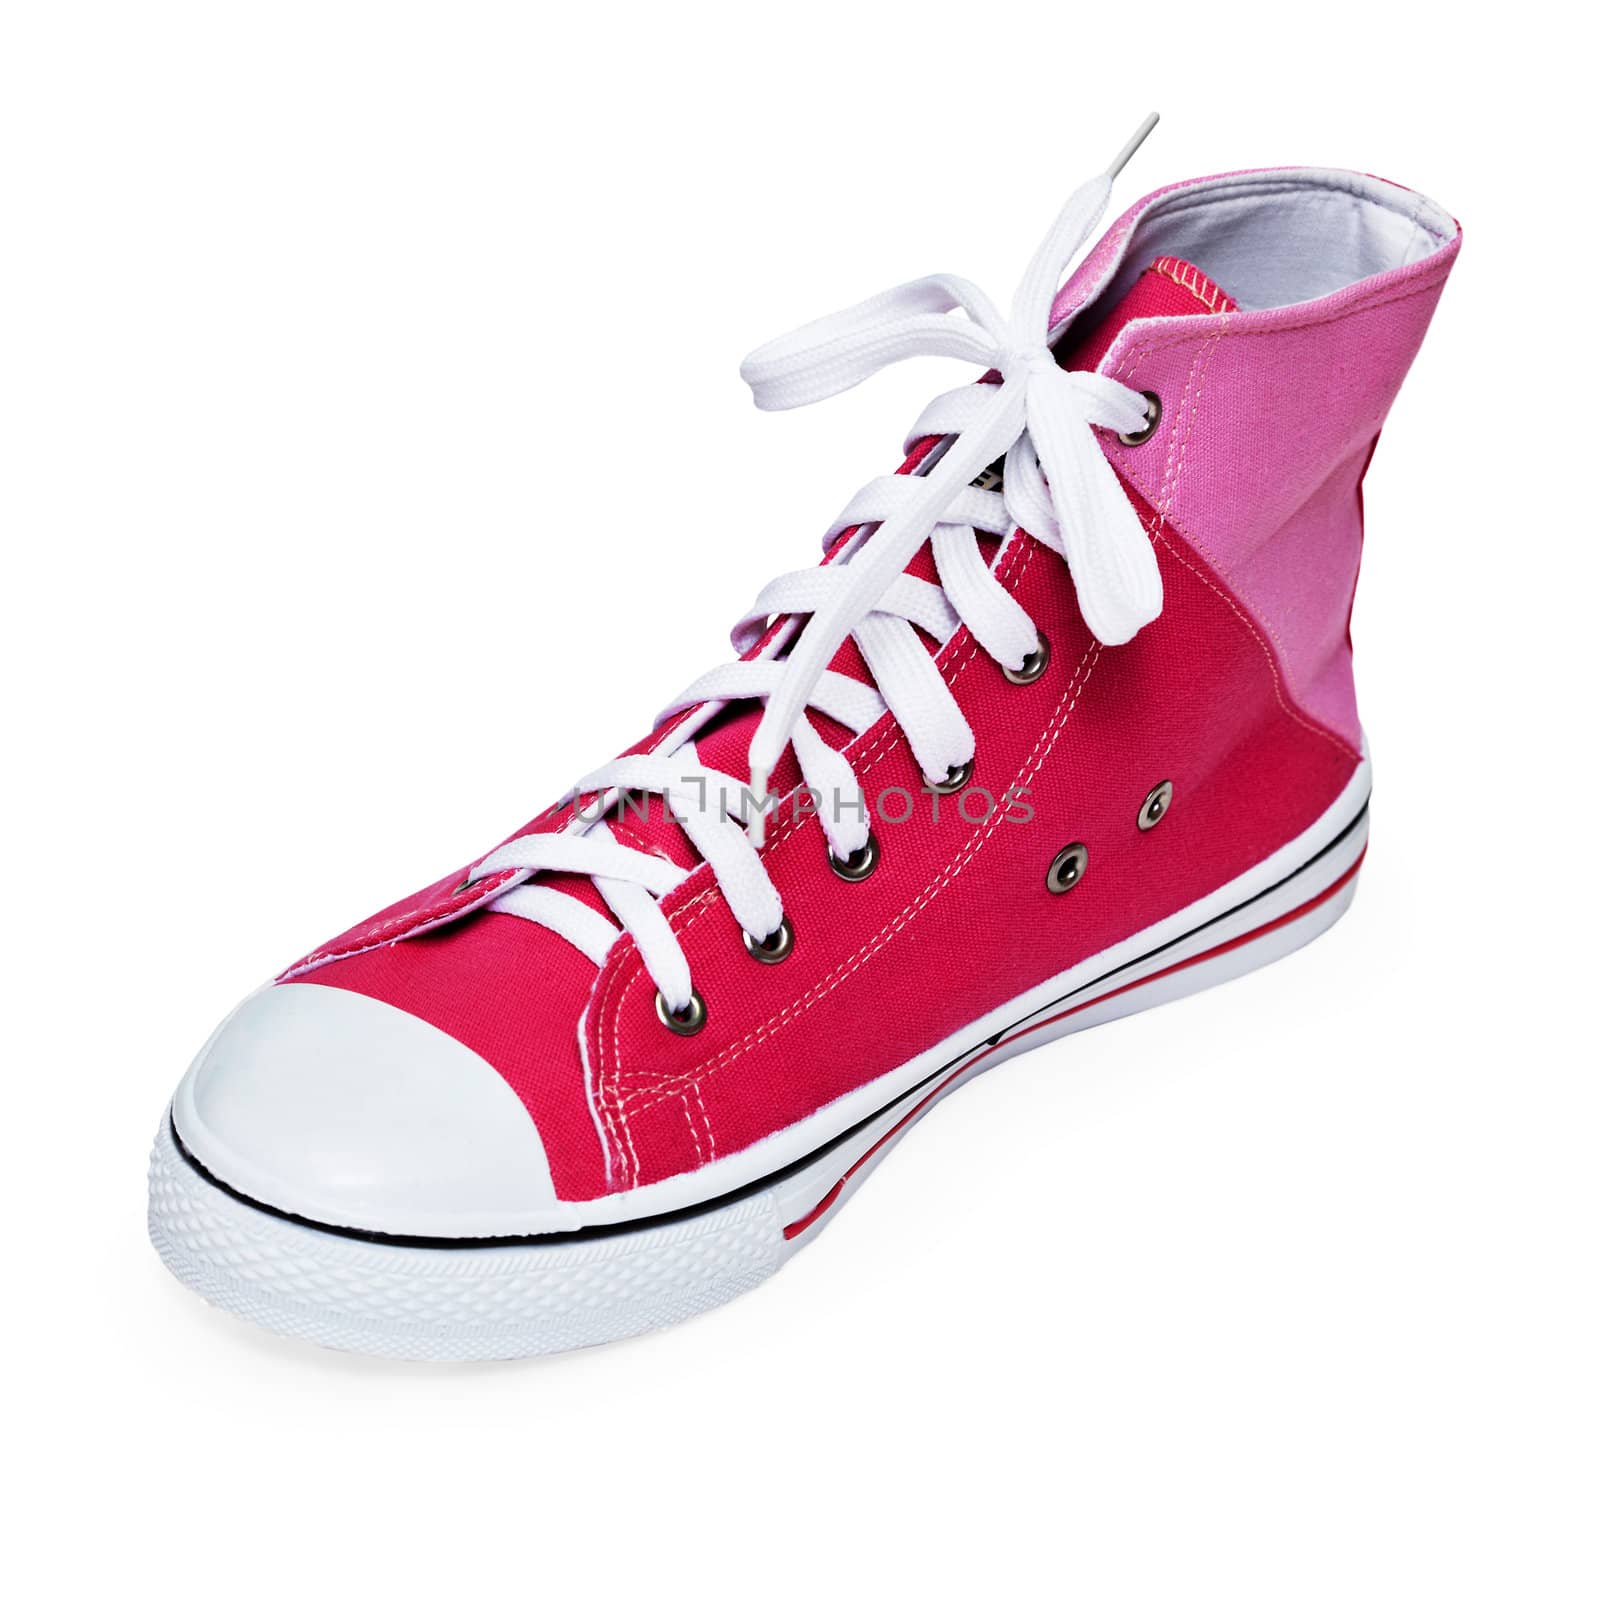 Fashionable youth sports shoe on white by pzaxe